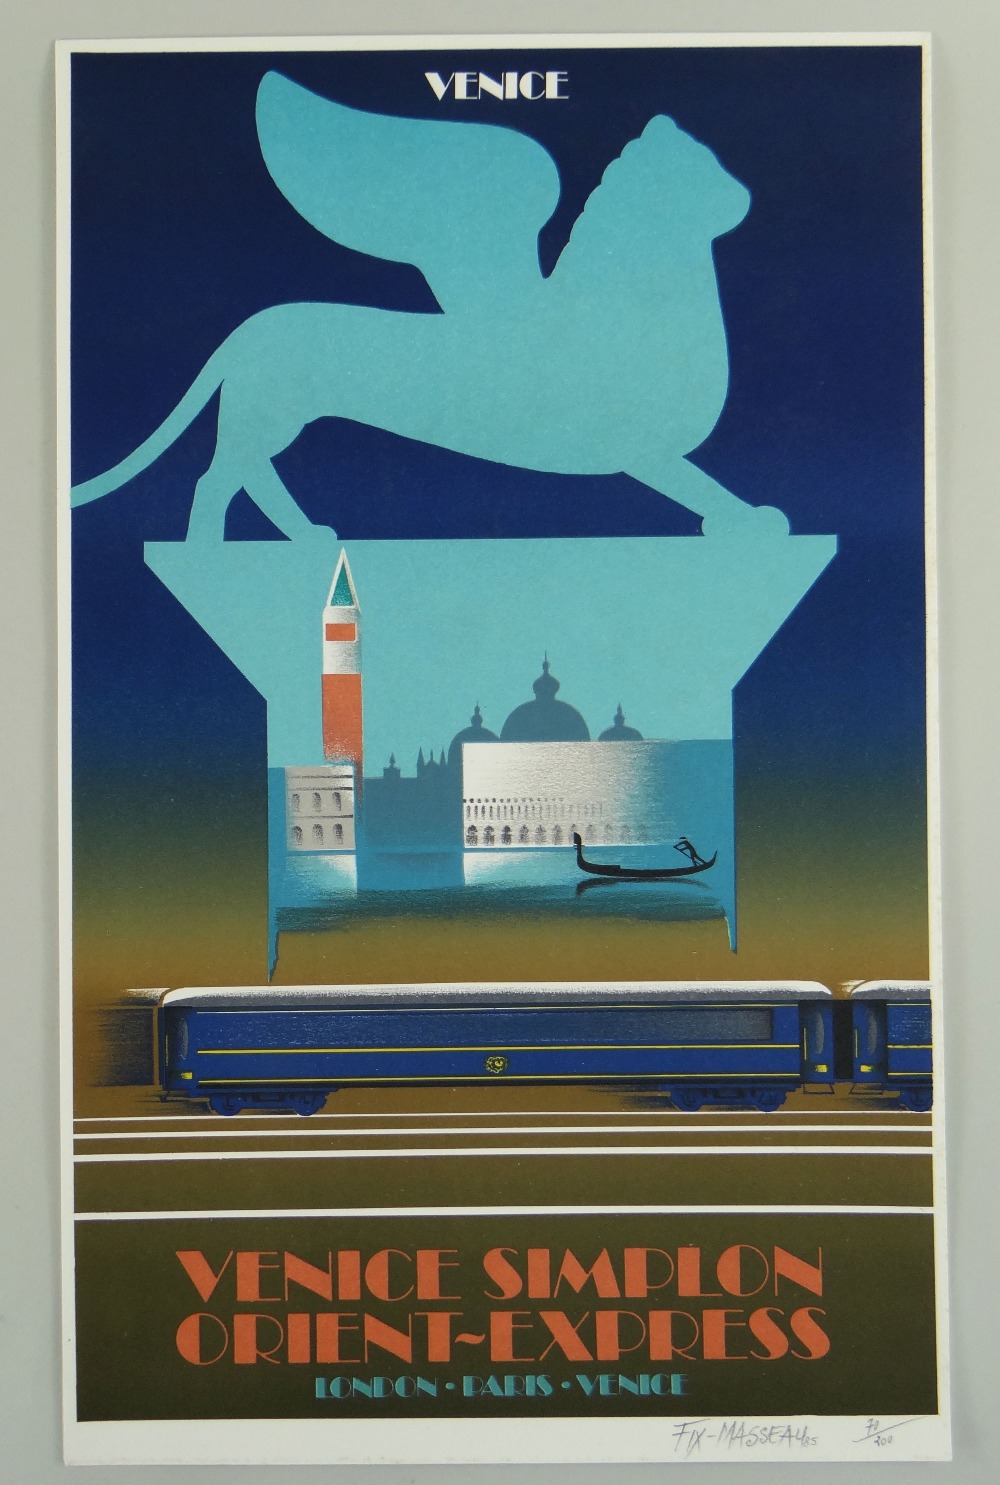 PIERRE FIX-MASSEAU boxed set of twelve limited edition (70/200) coloured lithographs - Venice - Image 13 of 20